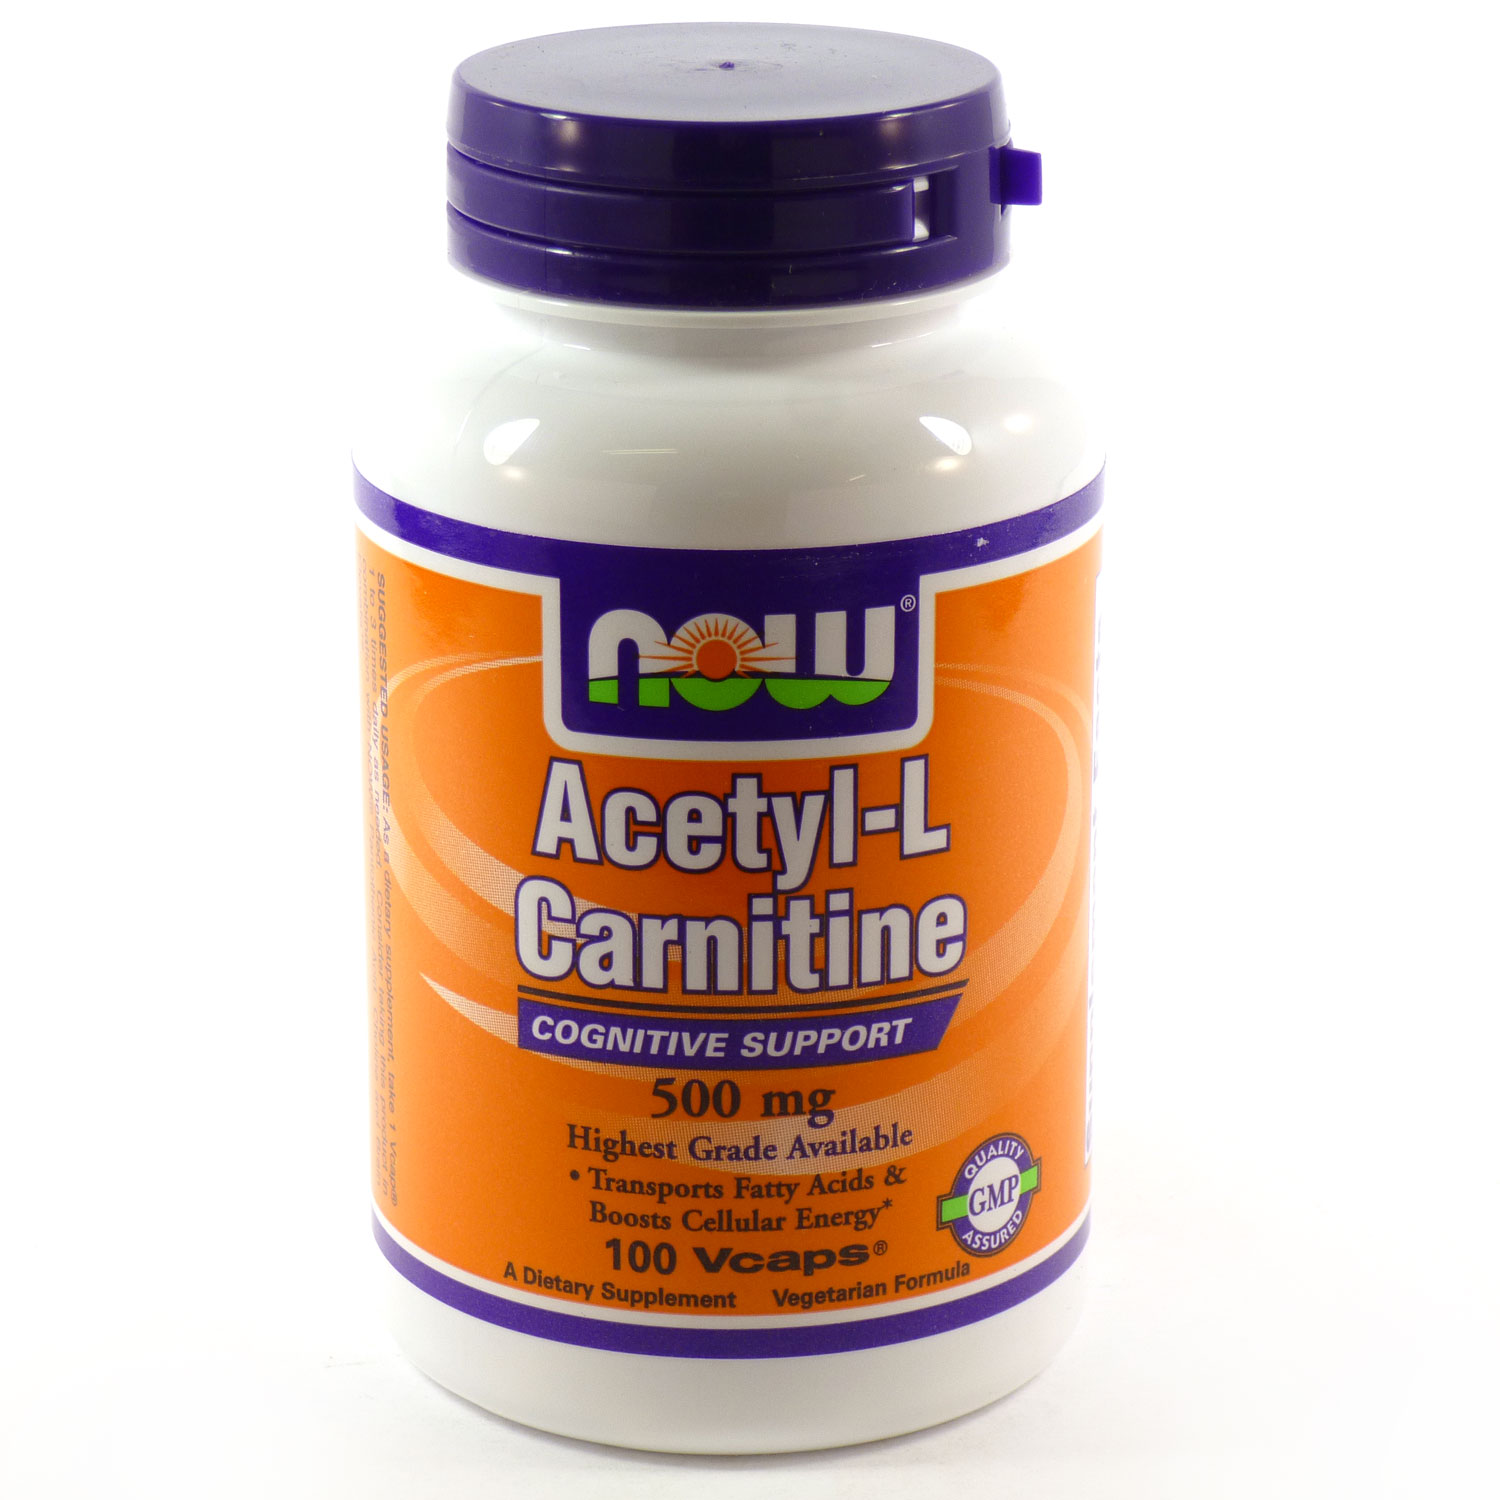 Now Acetyl-L Carnitine